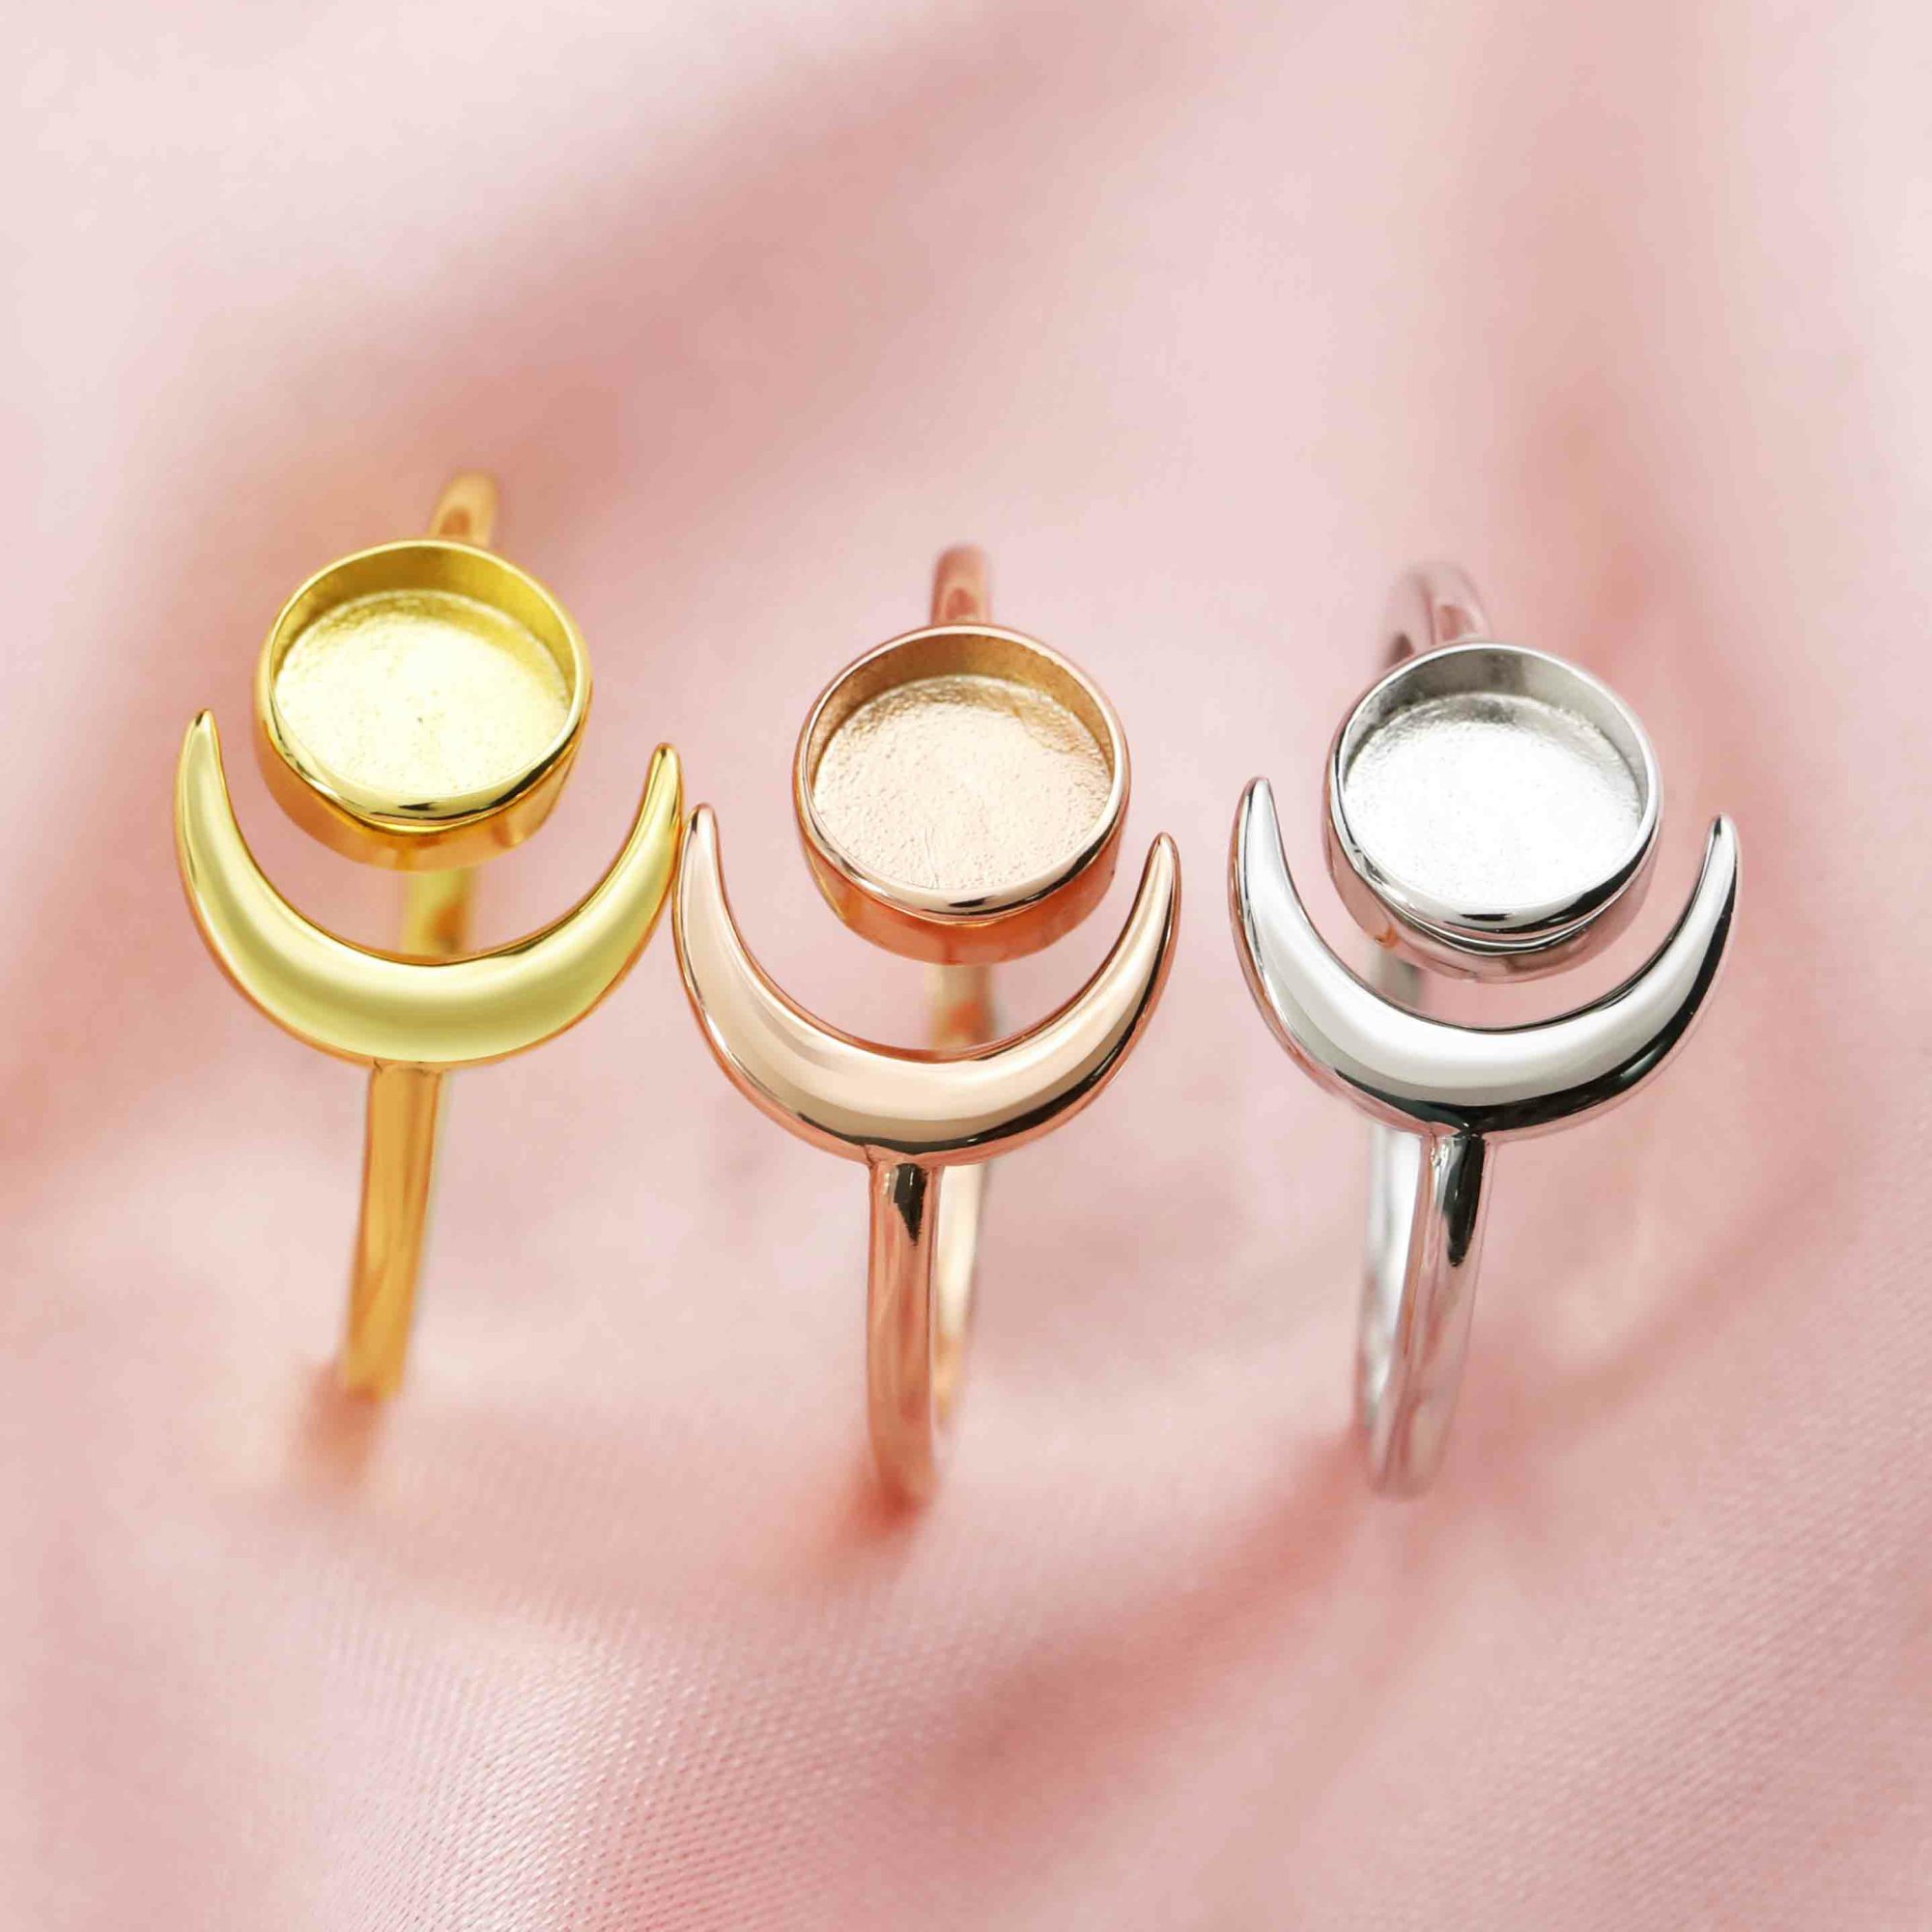 Keepsake Breast Milk 6MM Round Ring Settings Full Moon Resin Solid 14K/18K Gold DIY Ring Blank Band for Gemstone 1294328-1 - Click Image to Close